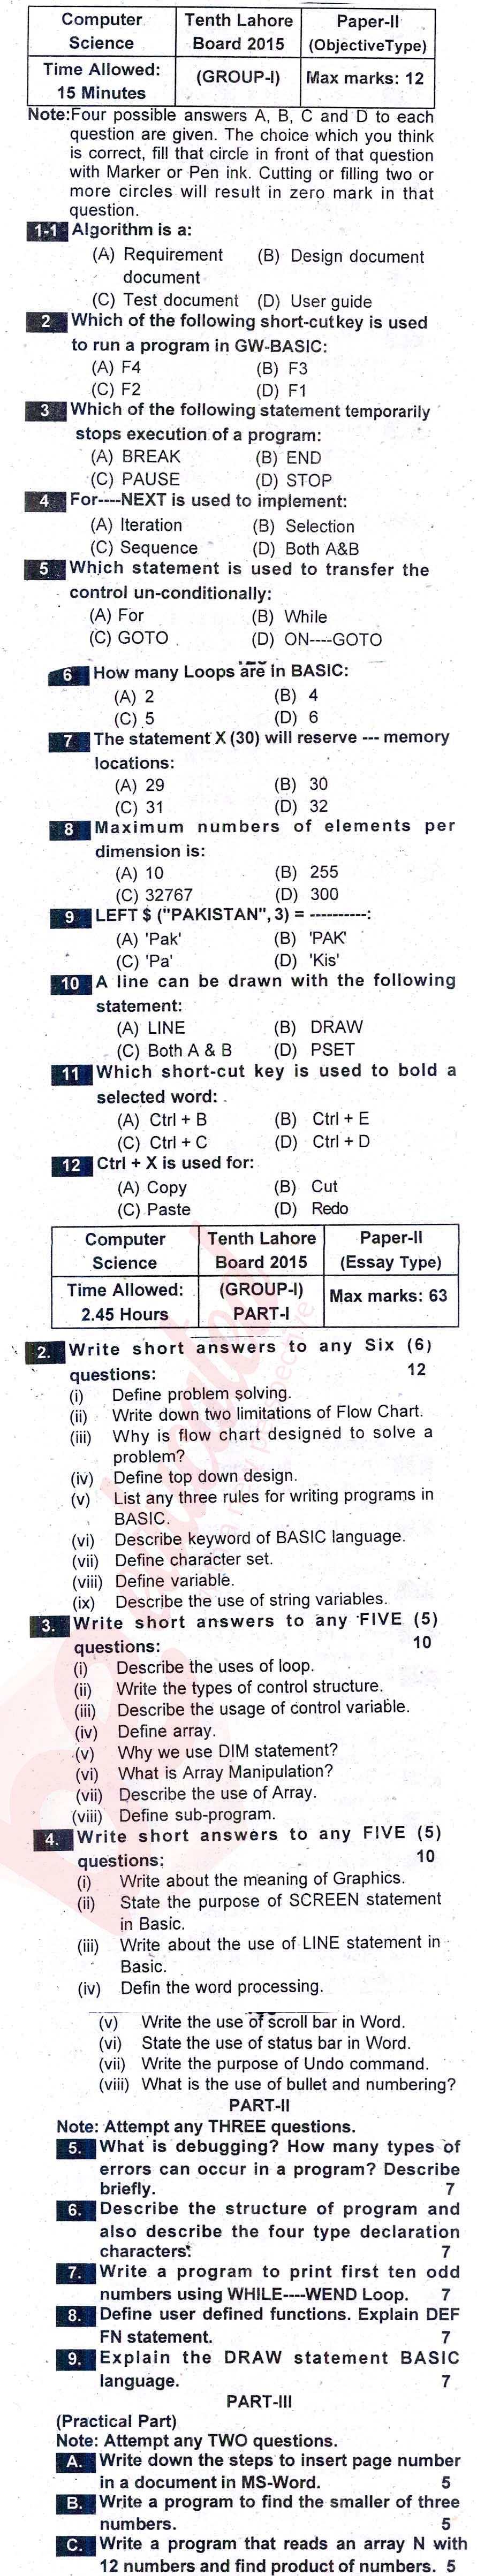 Computer Science 10th English Medium Past Paper Group 1 BISE Lahore 2015